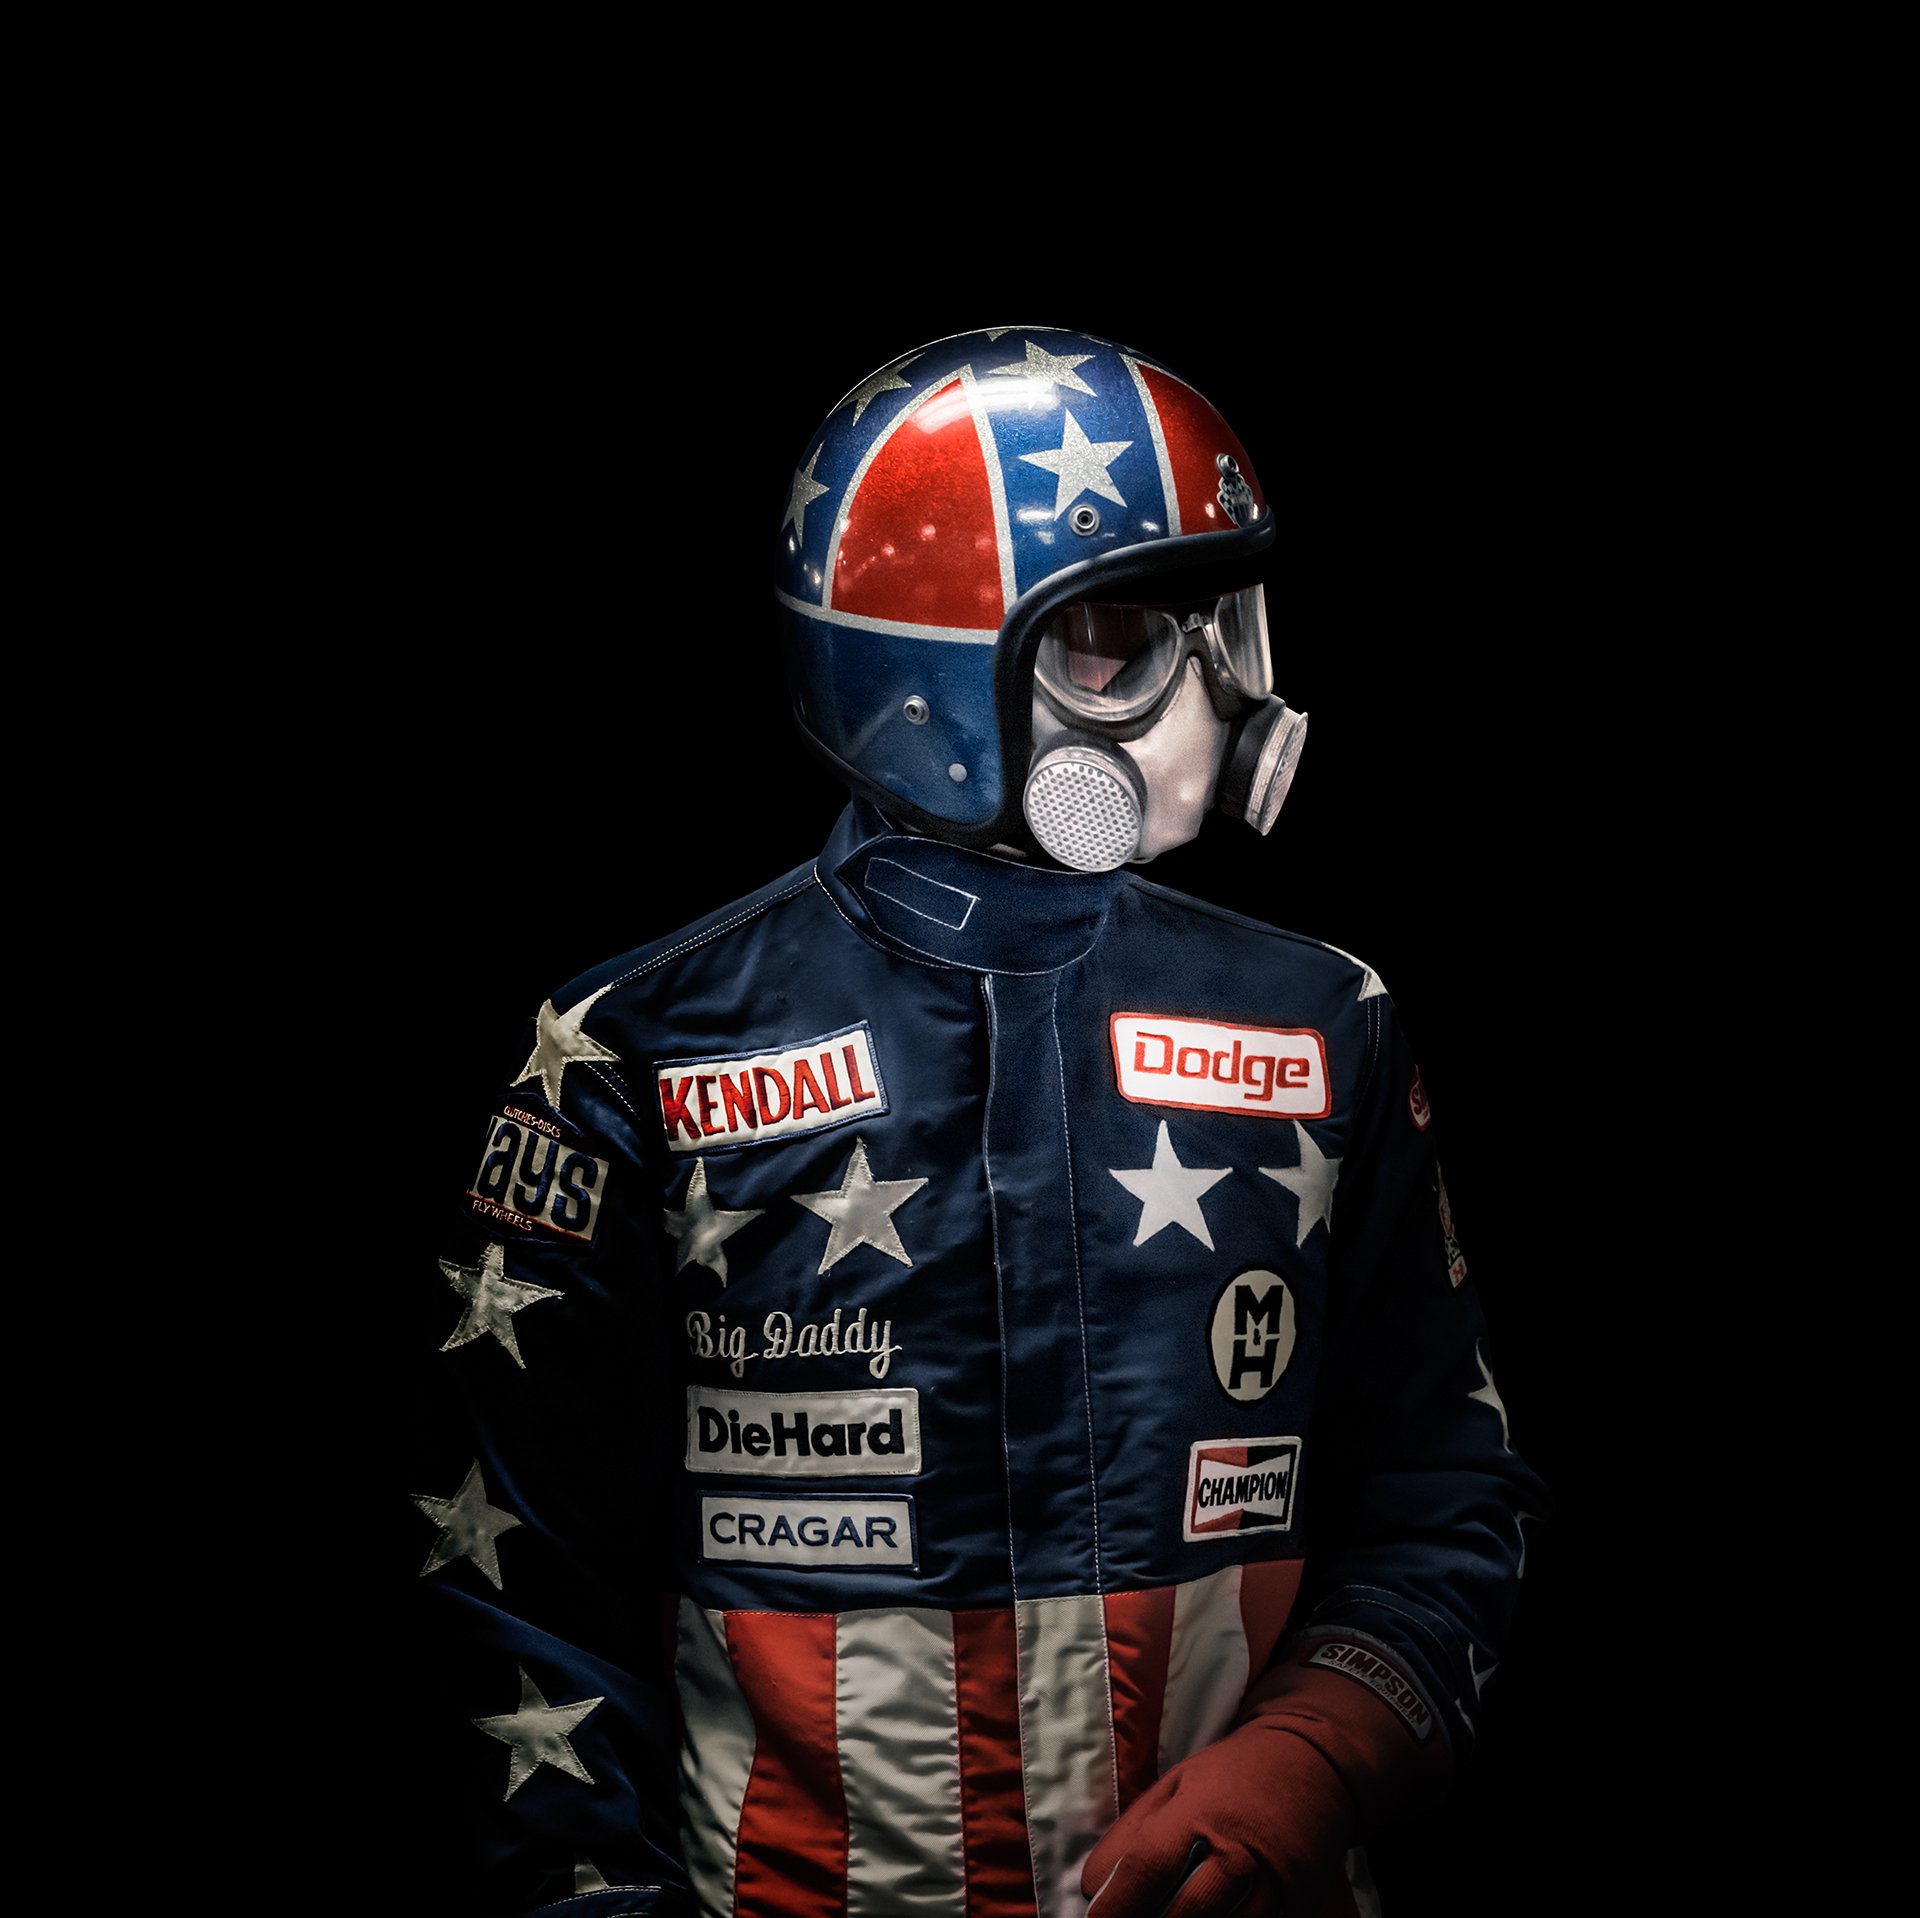 These "Dragster Driver" Portraits Make Them Look Like Super Heroes